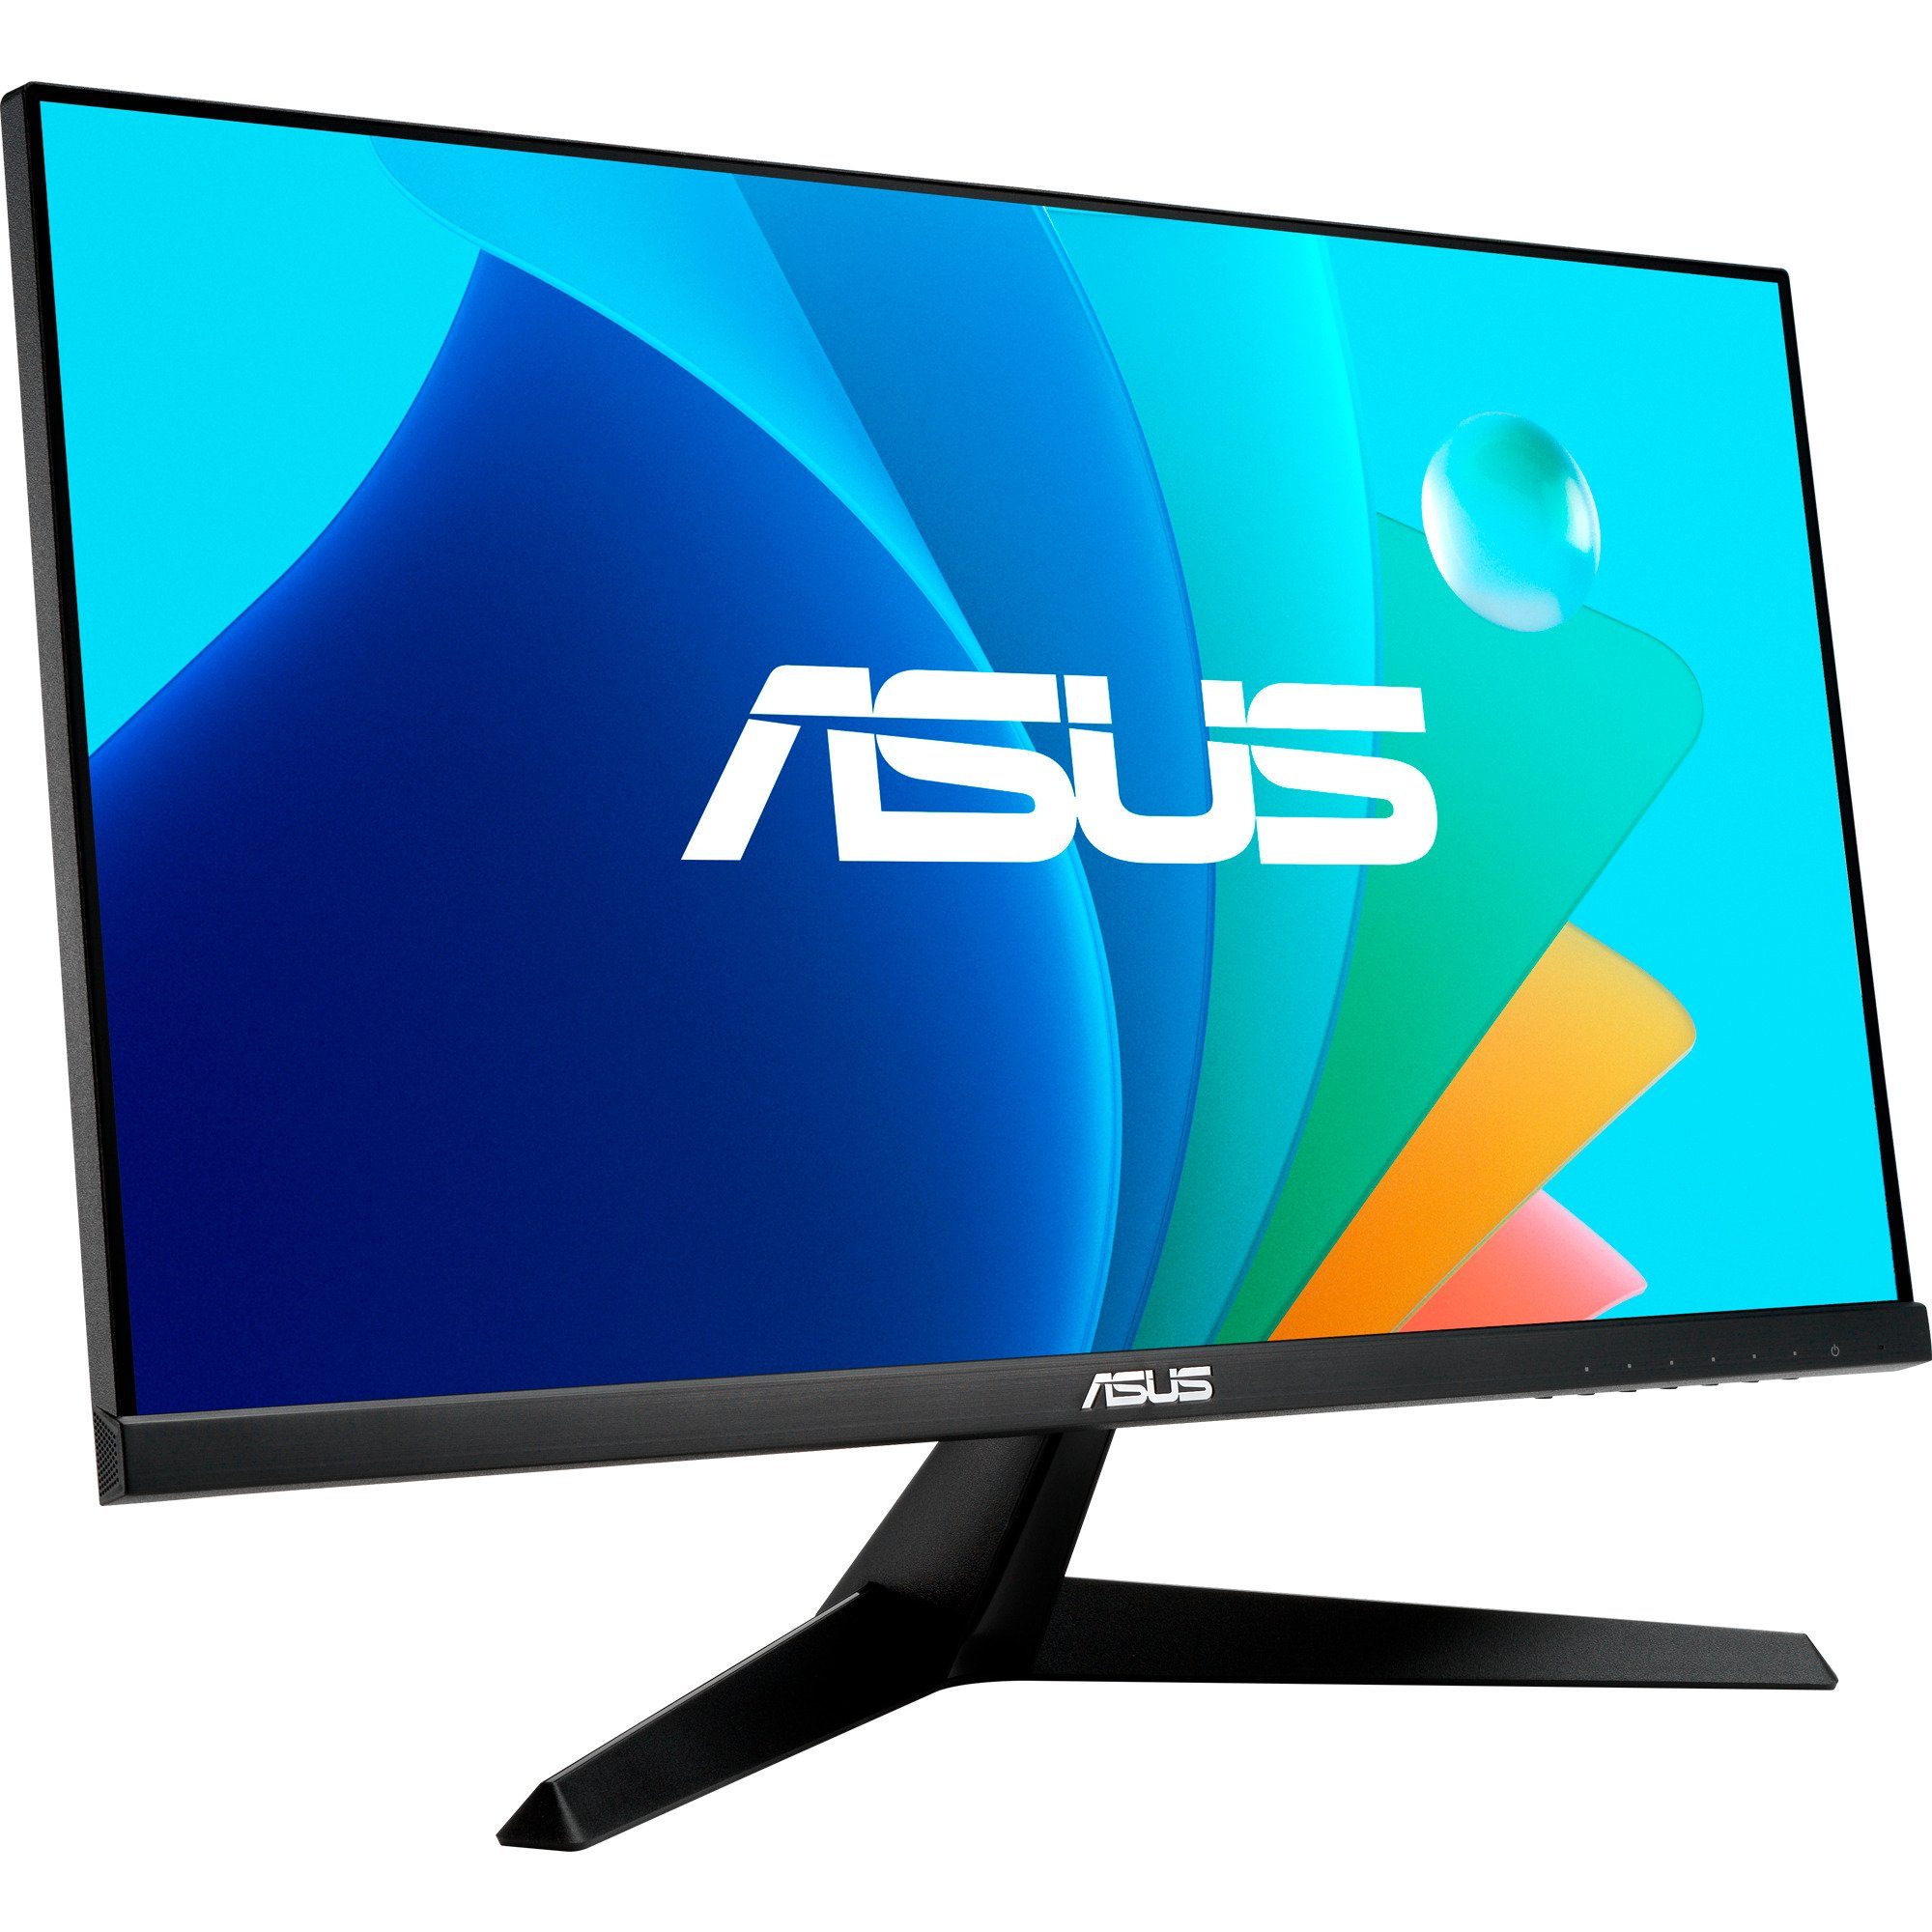 Asus Eye Care VY249HF LED-Monitor (1920 x 1080 Pixel px)